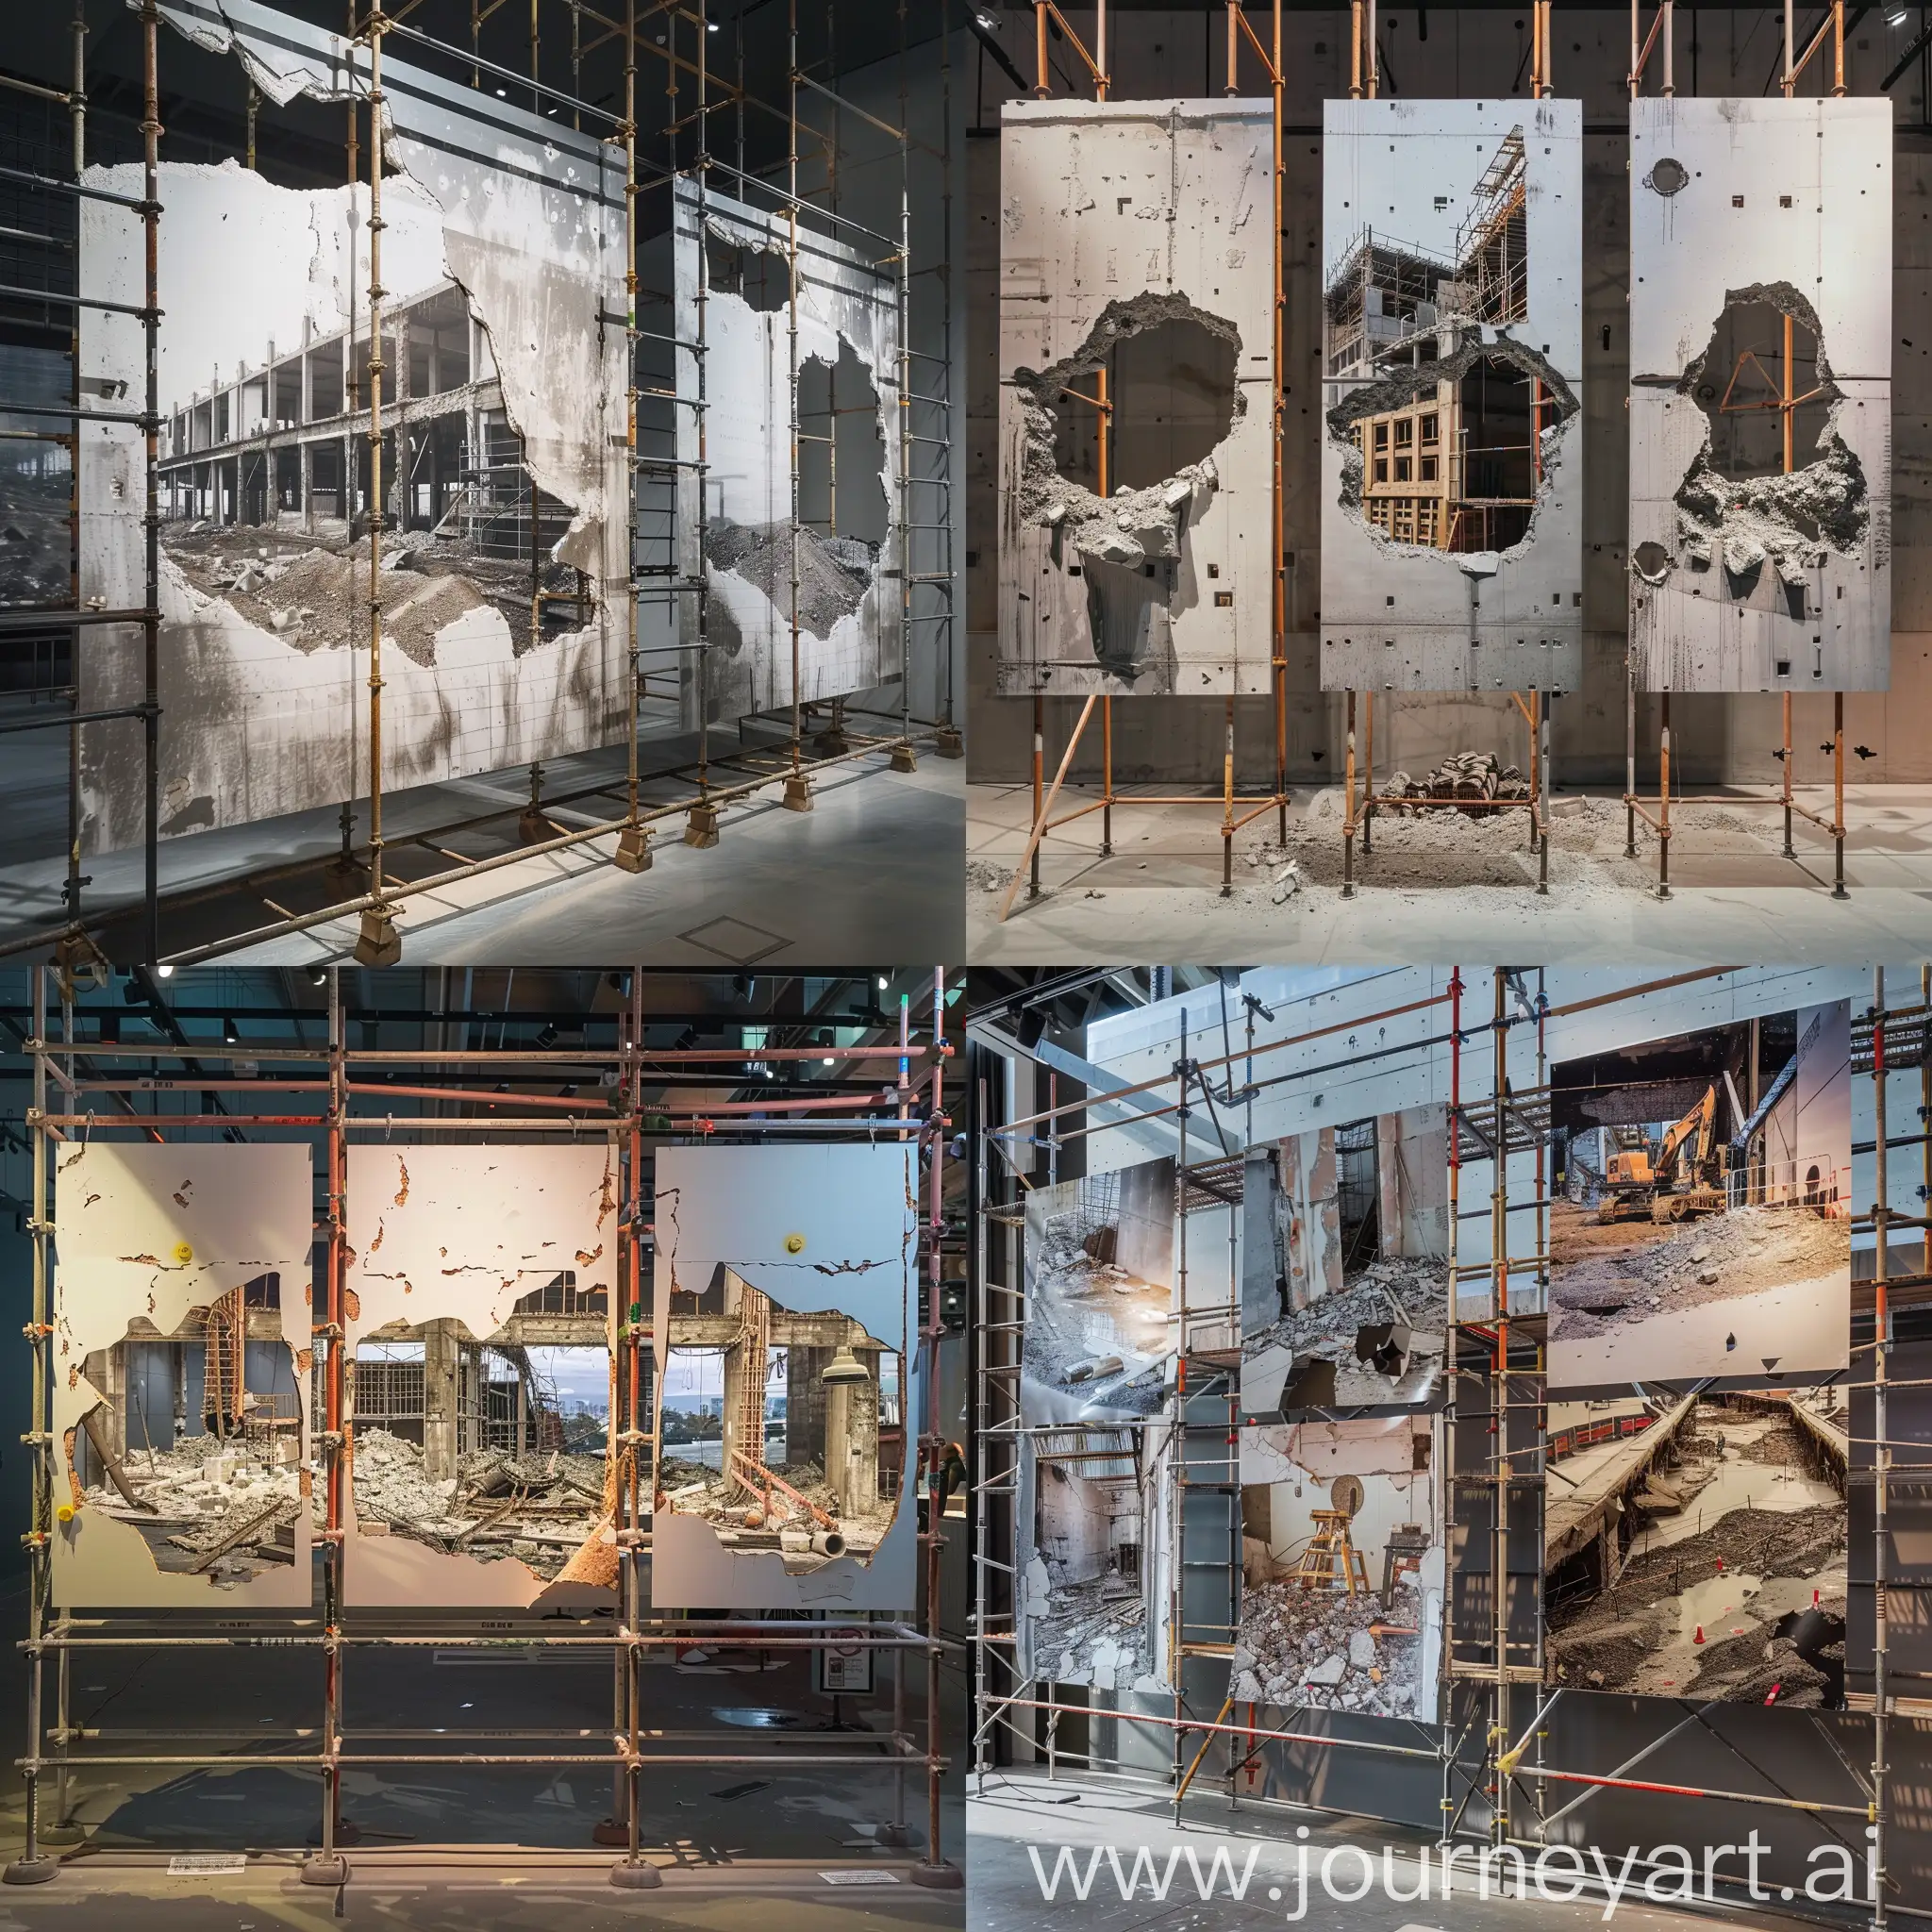 a photo exhibition featuring three large, wide-angle photos of construction sites, mounted on scaffolding in front of an wall like ad banners. The photos have holes and tears on them, through those holes we can see smaller close-up photos behind them on the wall